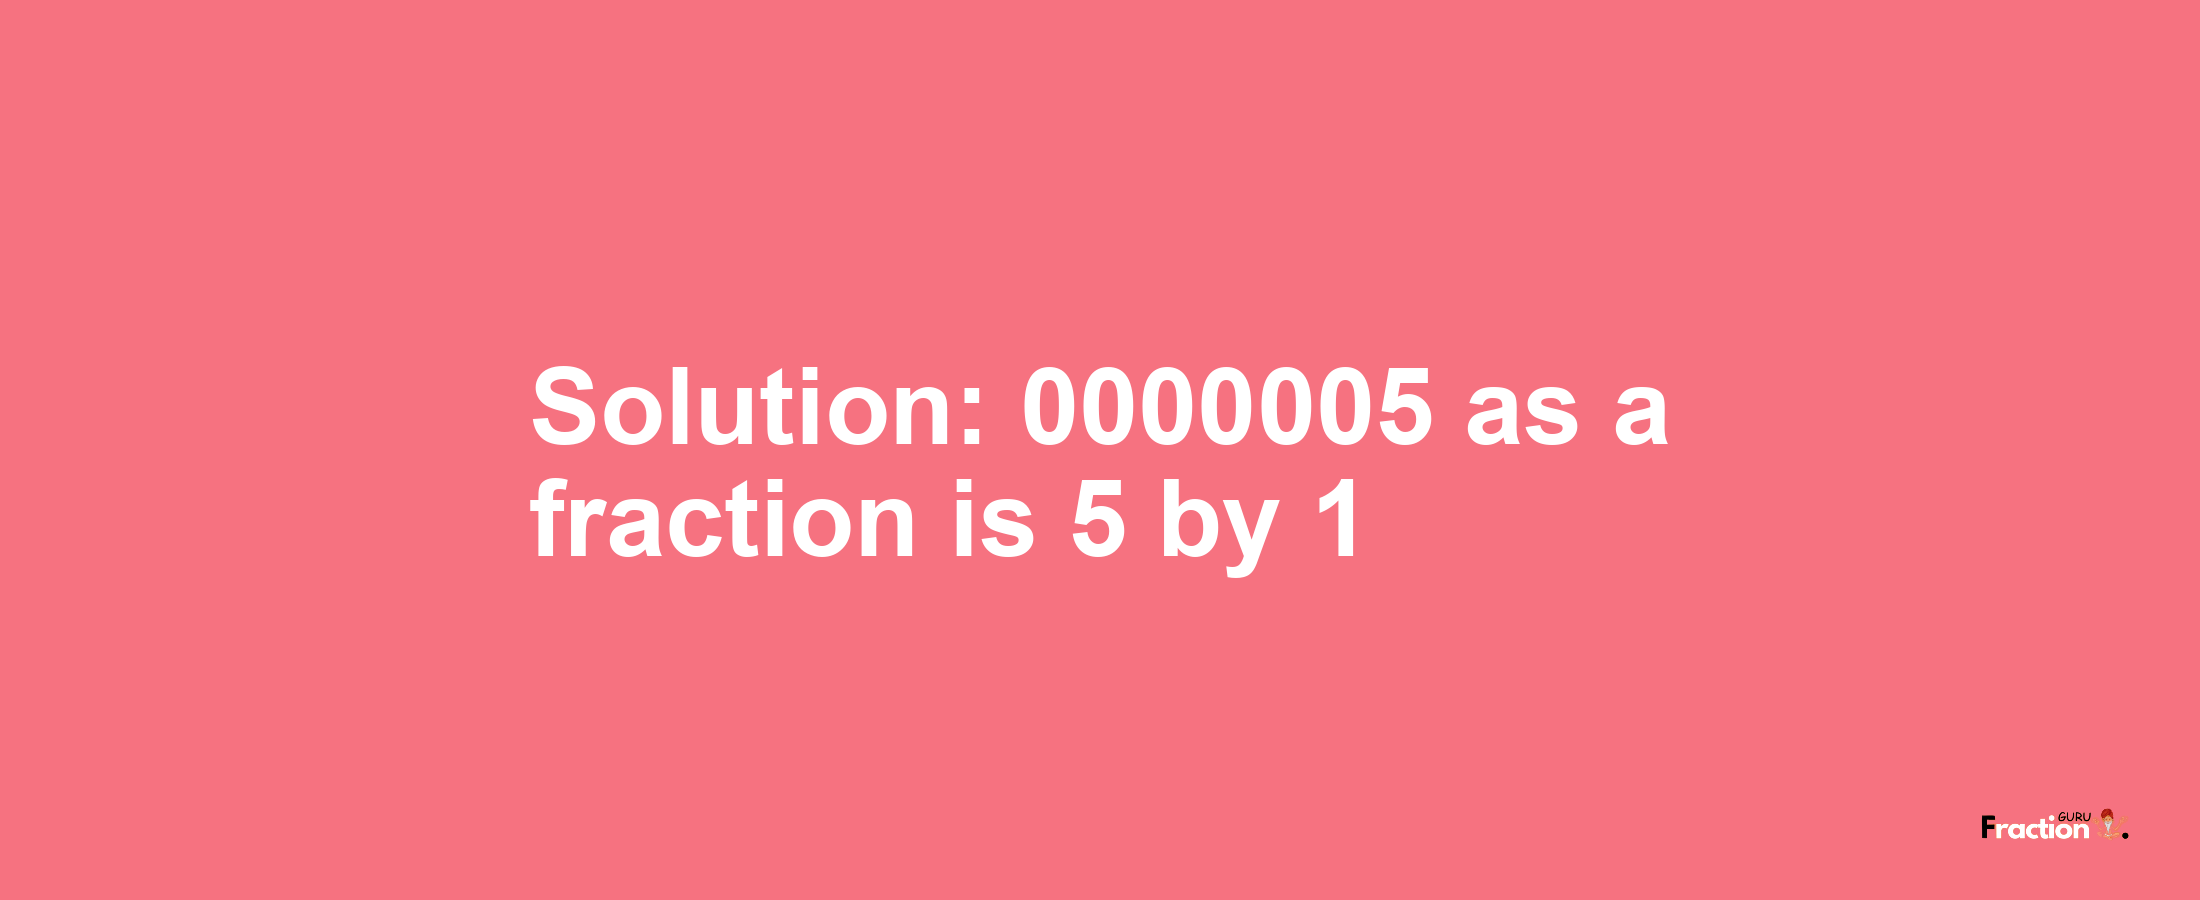 Solution:0000005 as a fraction is 5/1